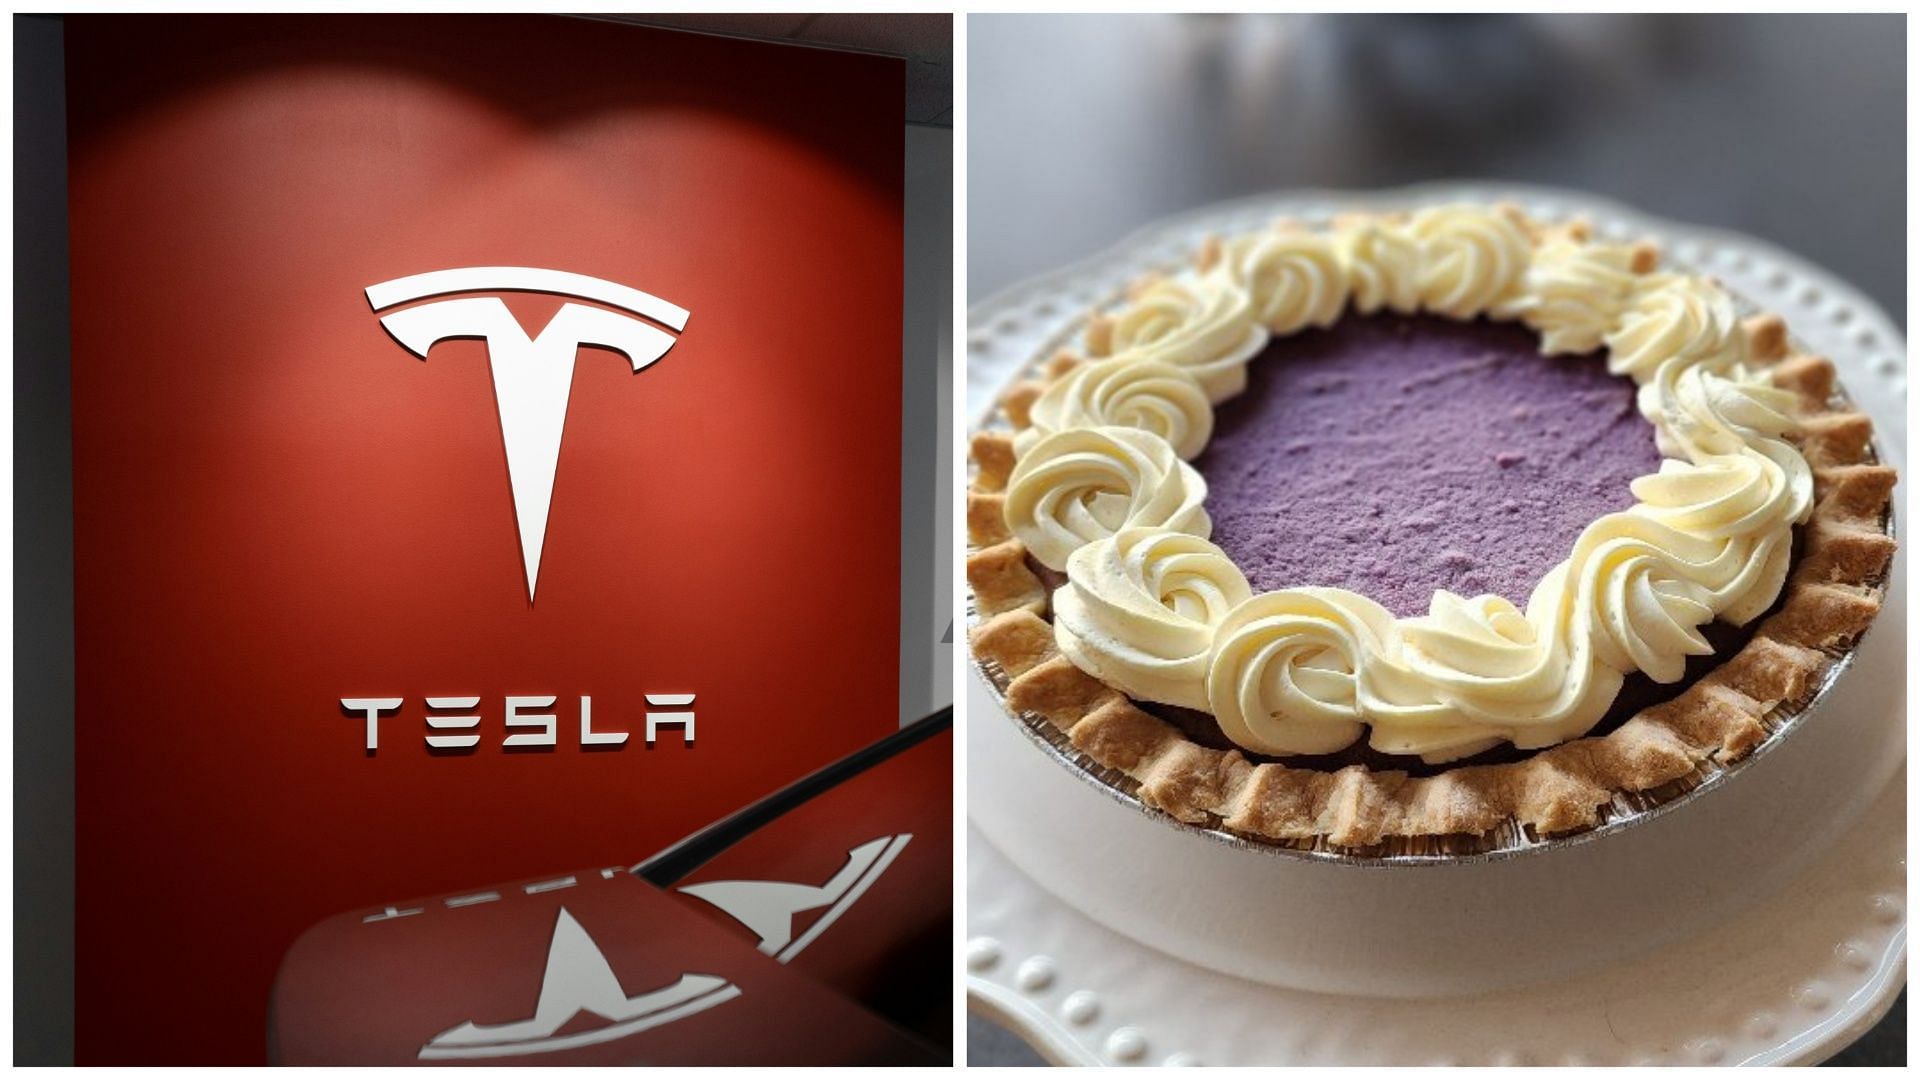 Bakery owner claims to have incurred loss after Tesla unexpectedly cancelled on huge order (Image via Instagram/@thegivingpies, Photo by Milan Csizmadia on Unsplash)